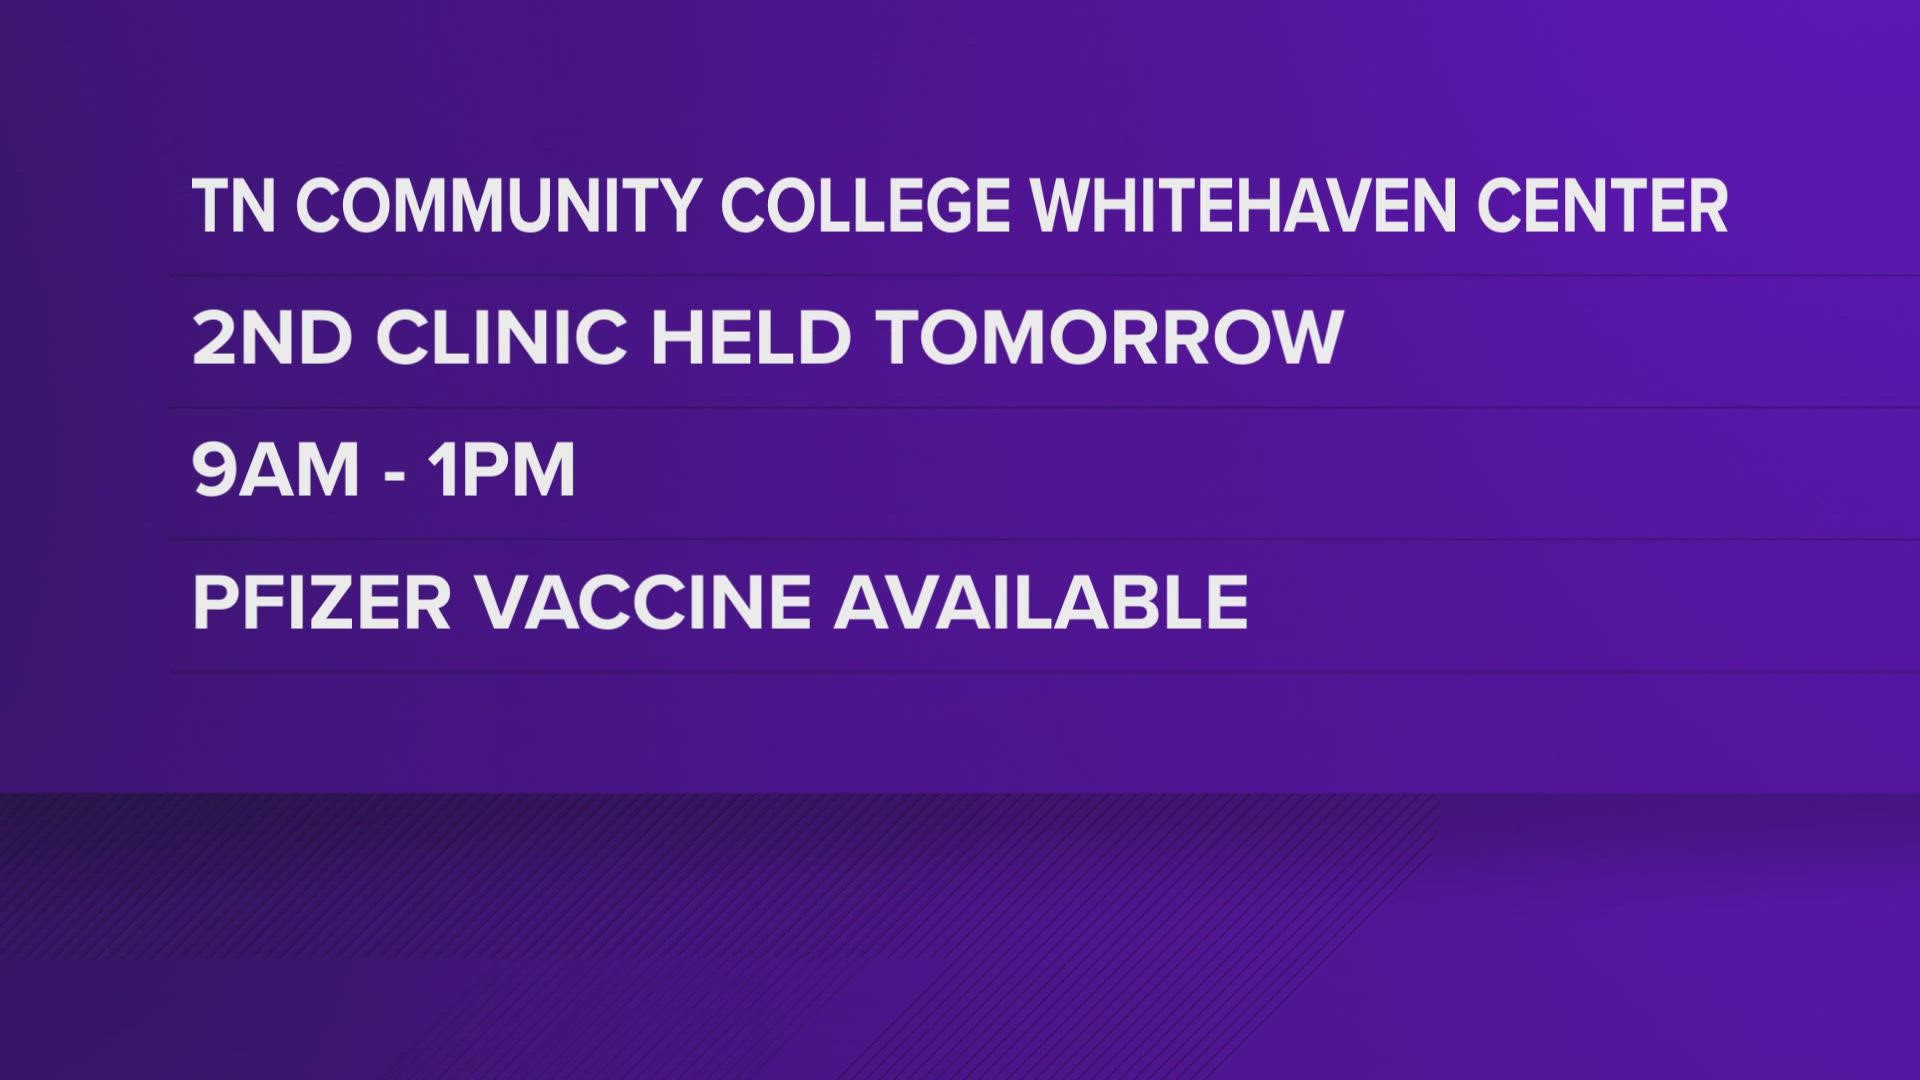 Events are being held Saturday and Sunday in Memphis to help folks get the COVID-19 vaccine if they still need it.